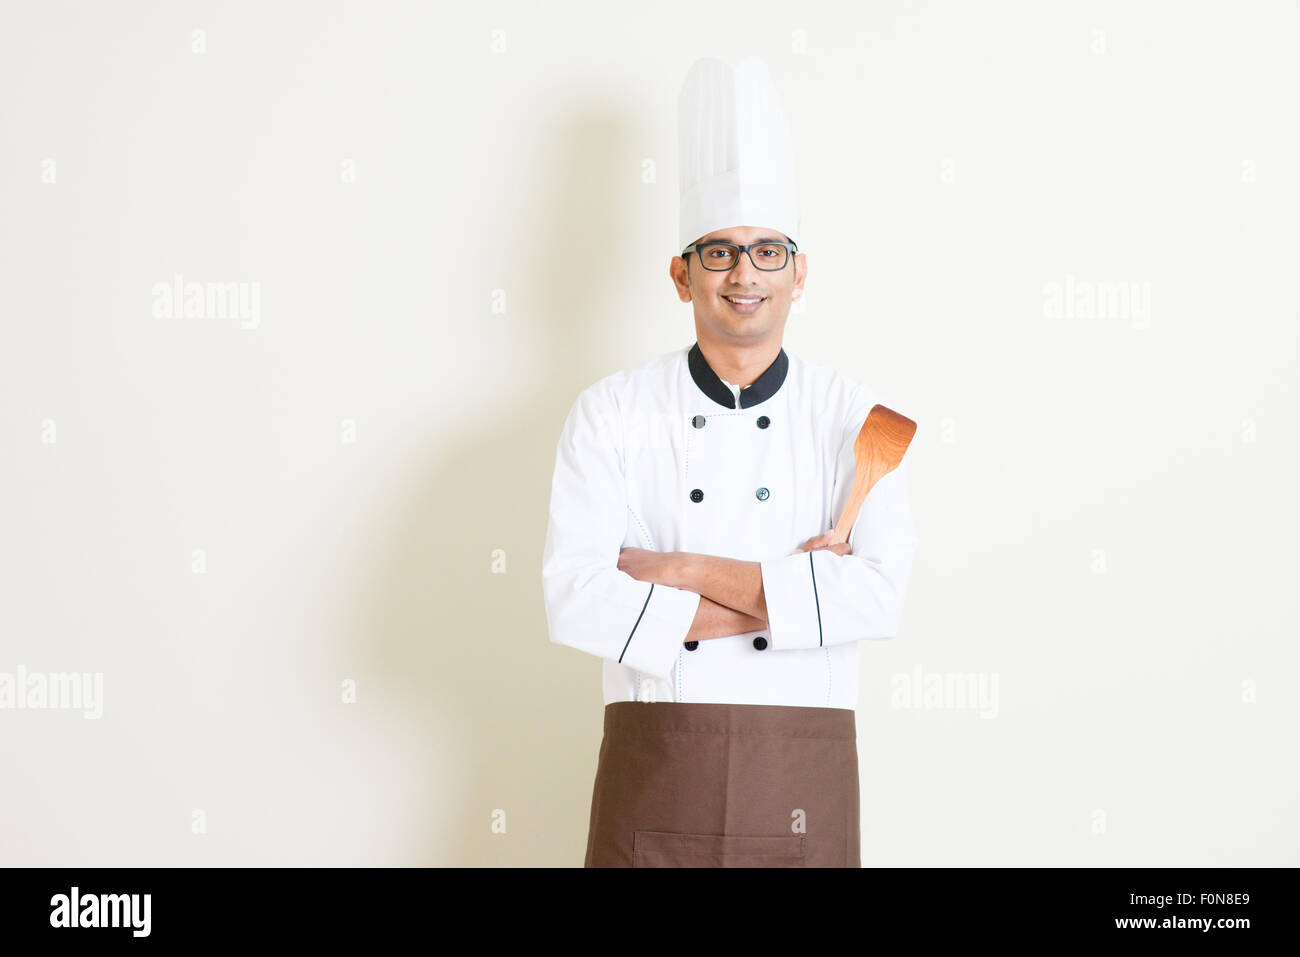 Portrait of handsome Indian male chef in uniform hand holding spatula and smiling, standing on plain background with shadow, cop Stock Photo